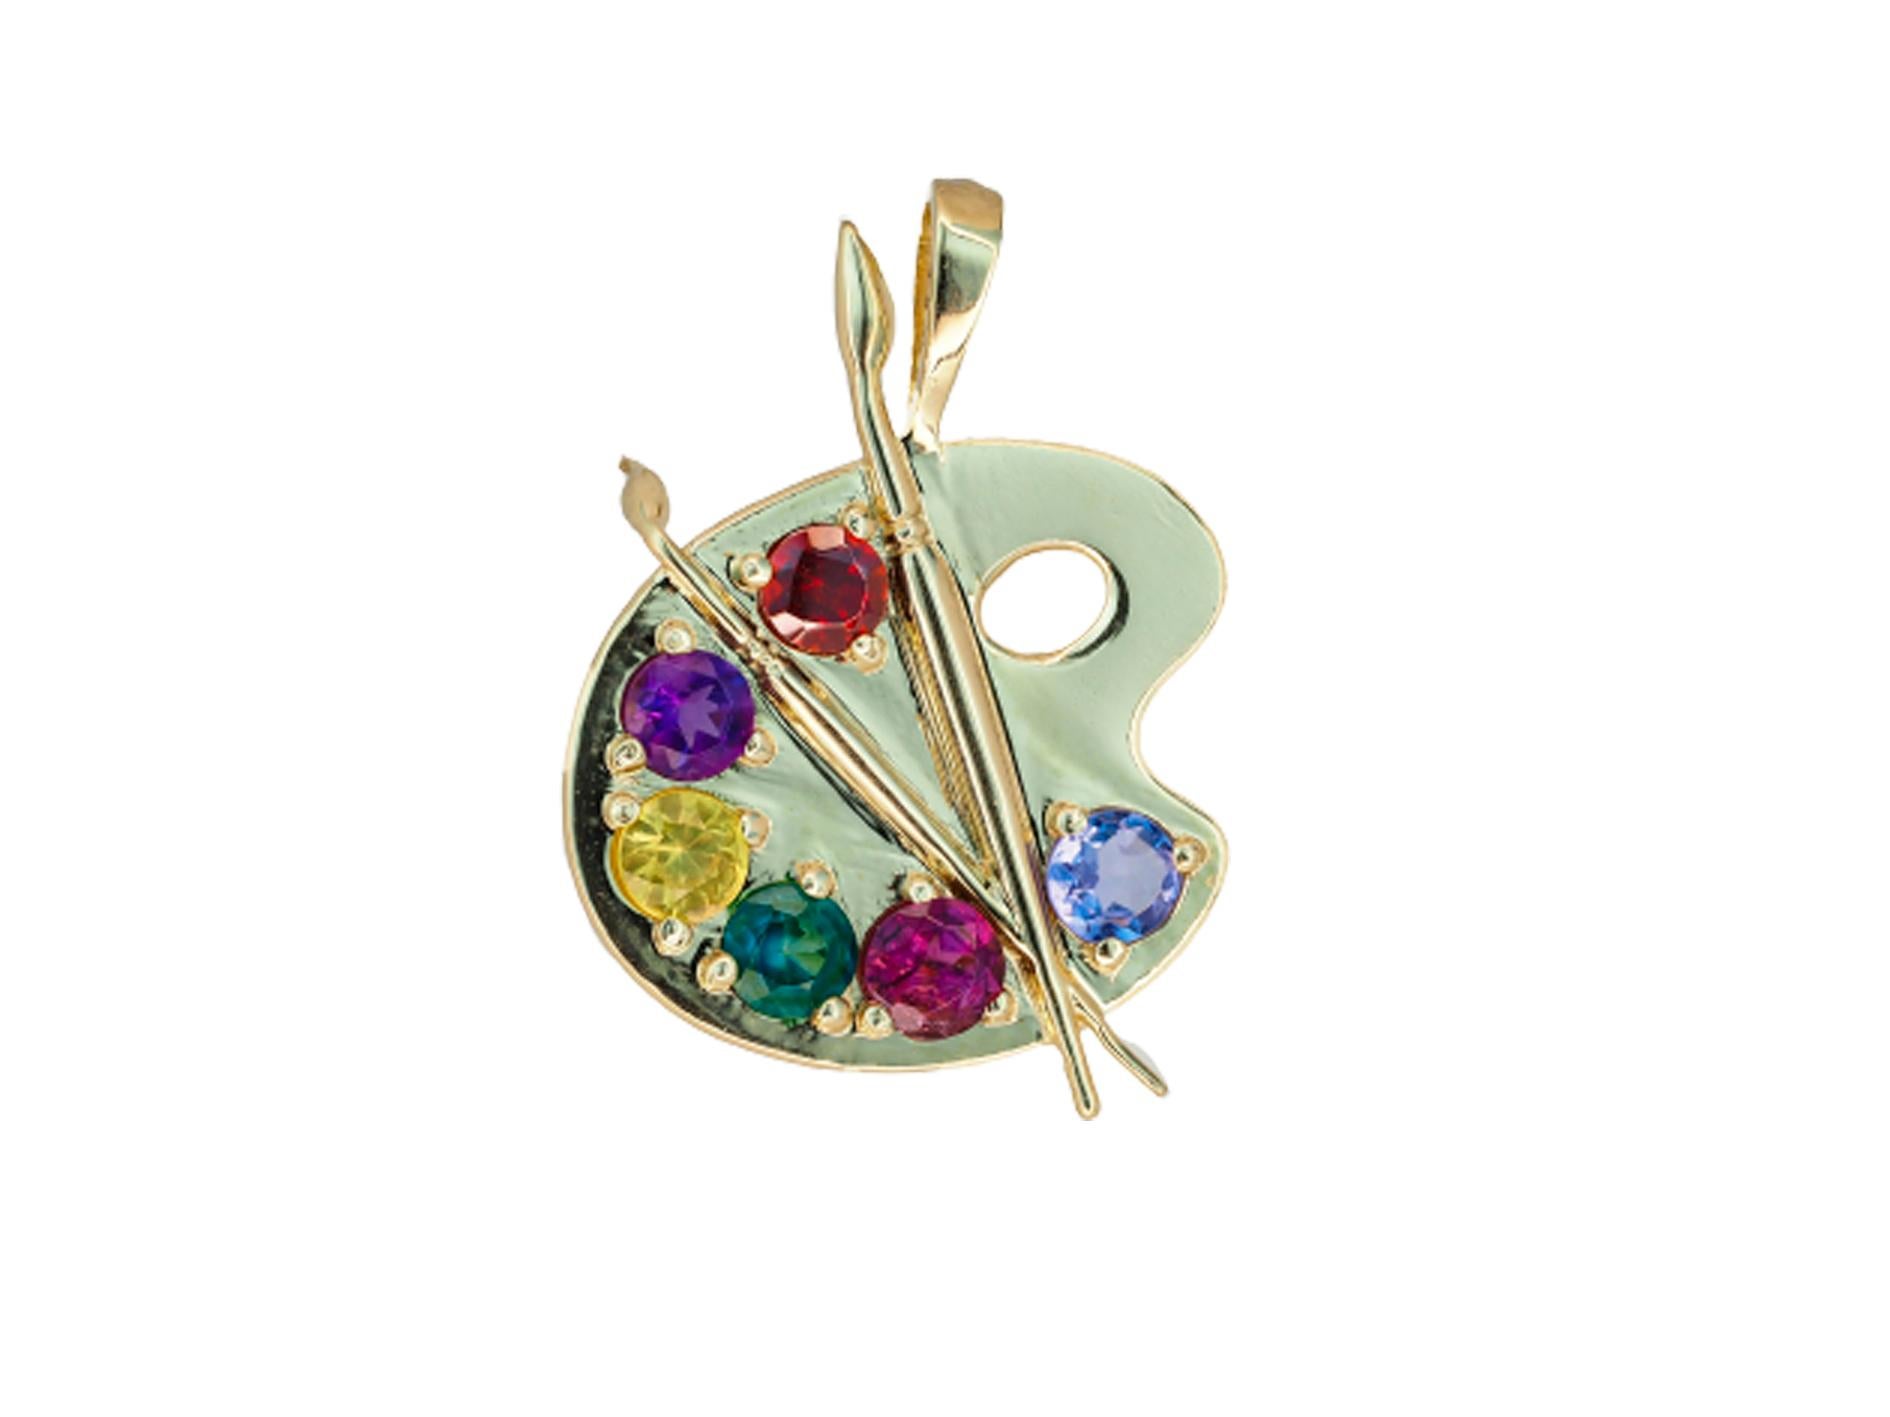 Palette with Paints 14k Gold Pendant with Colored Stones For Sale 5